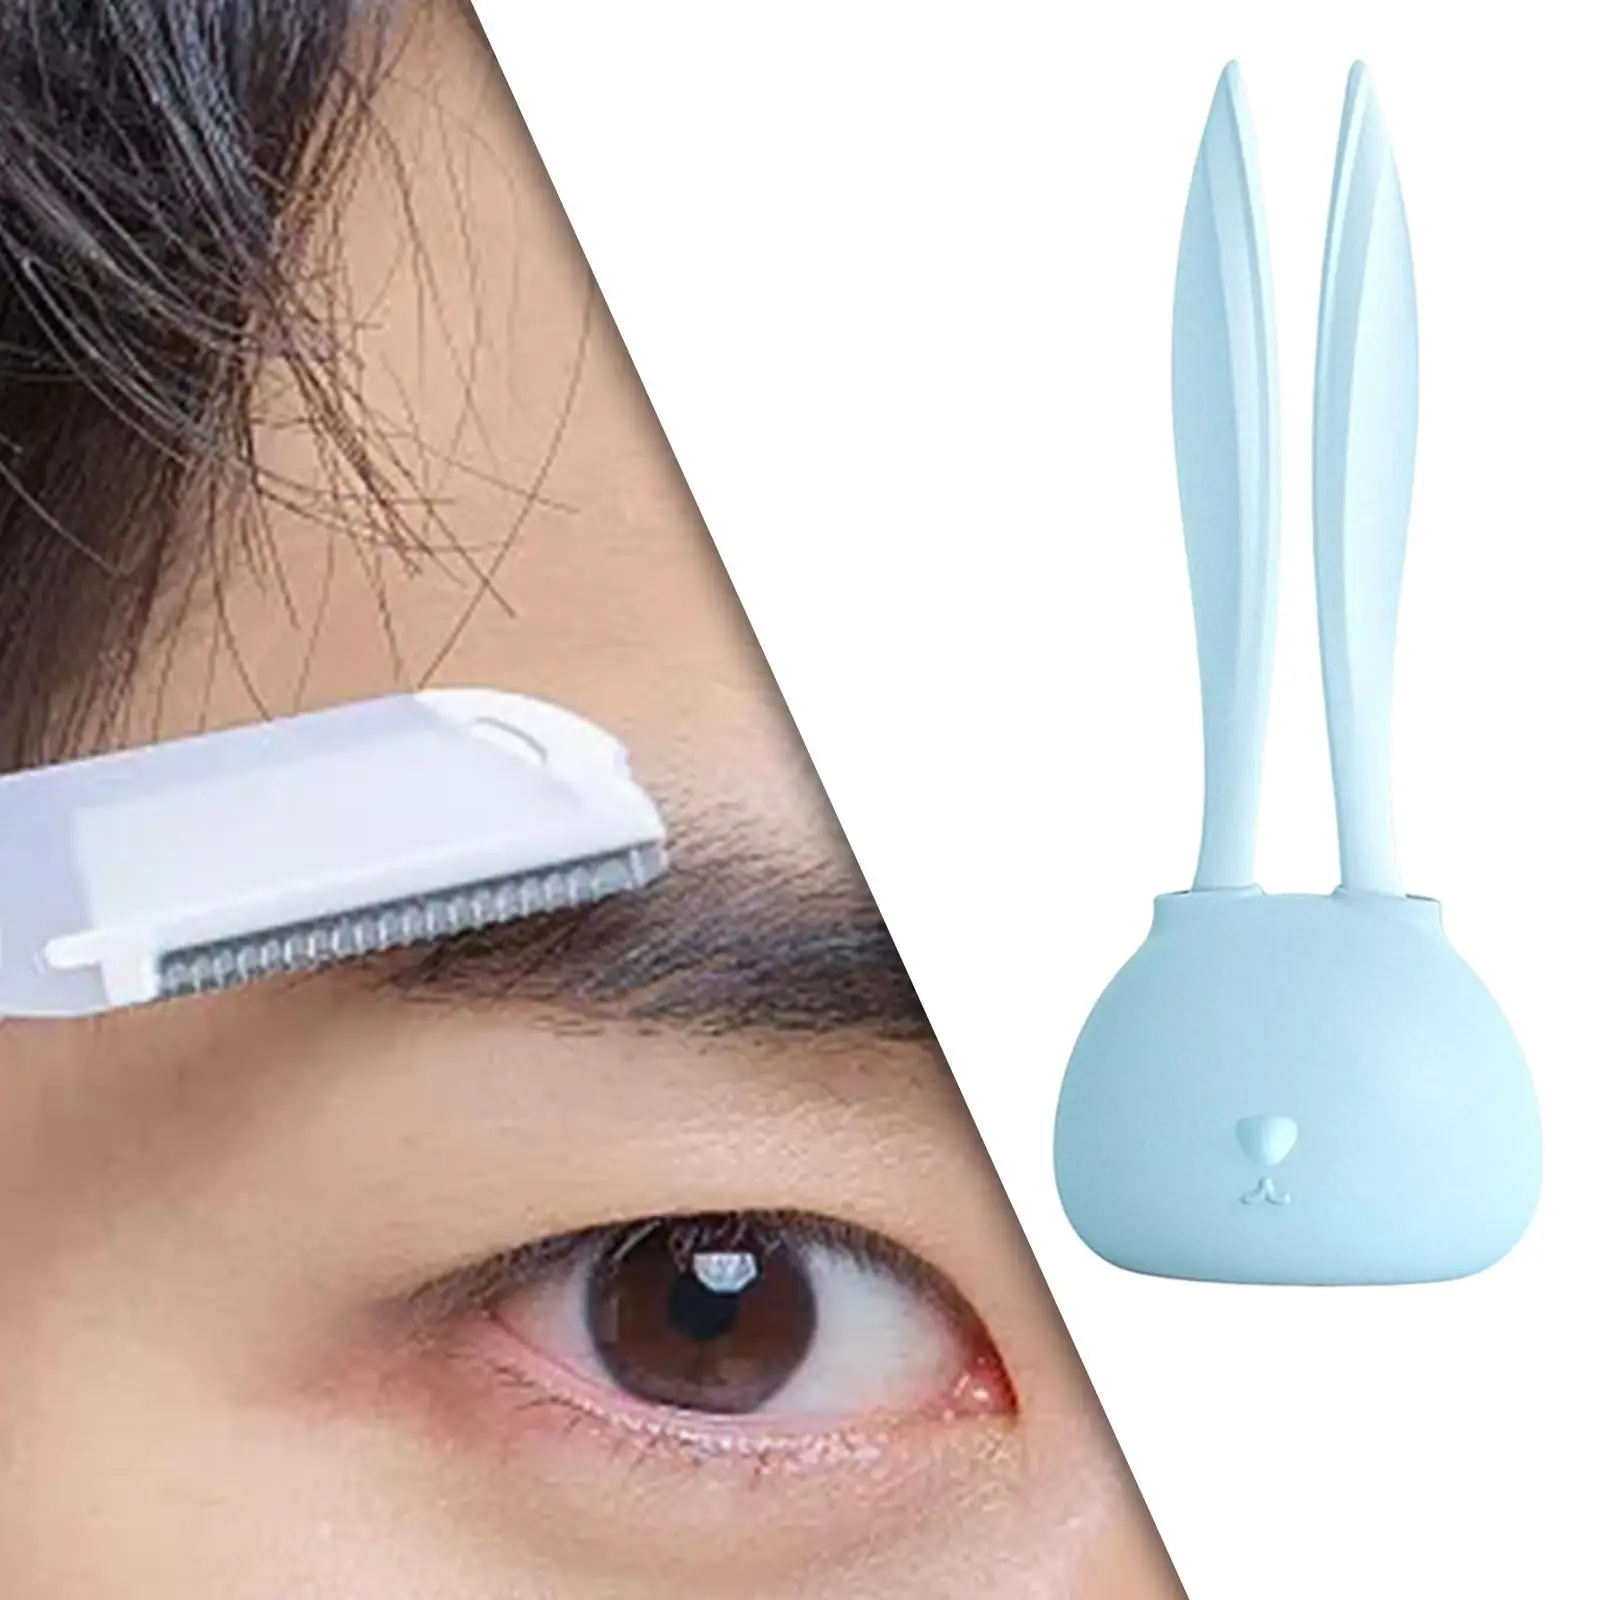 2x Eyebrow Shaper Trimming Smoothing Reusable Shaping Detailing Groomer Handheld Facial Remover for Legs Outdoor face